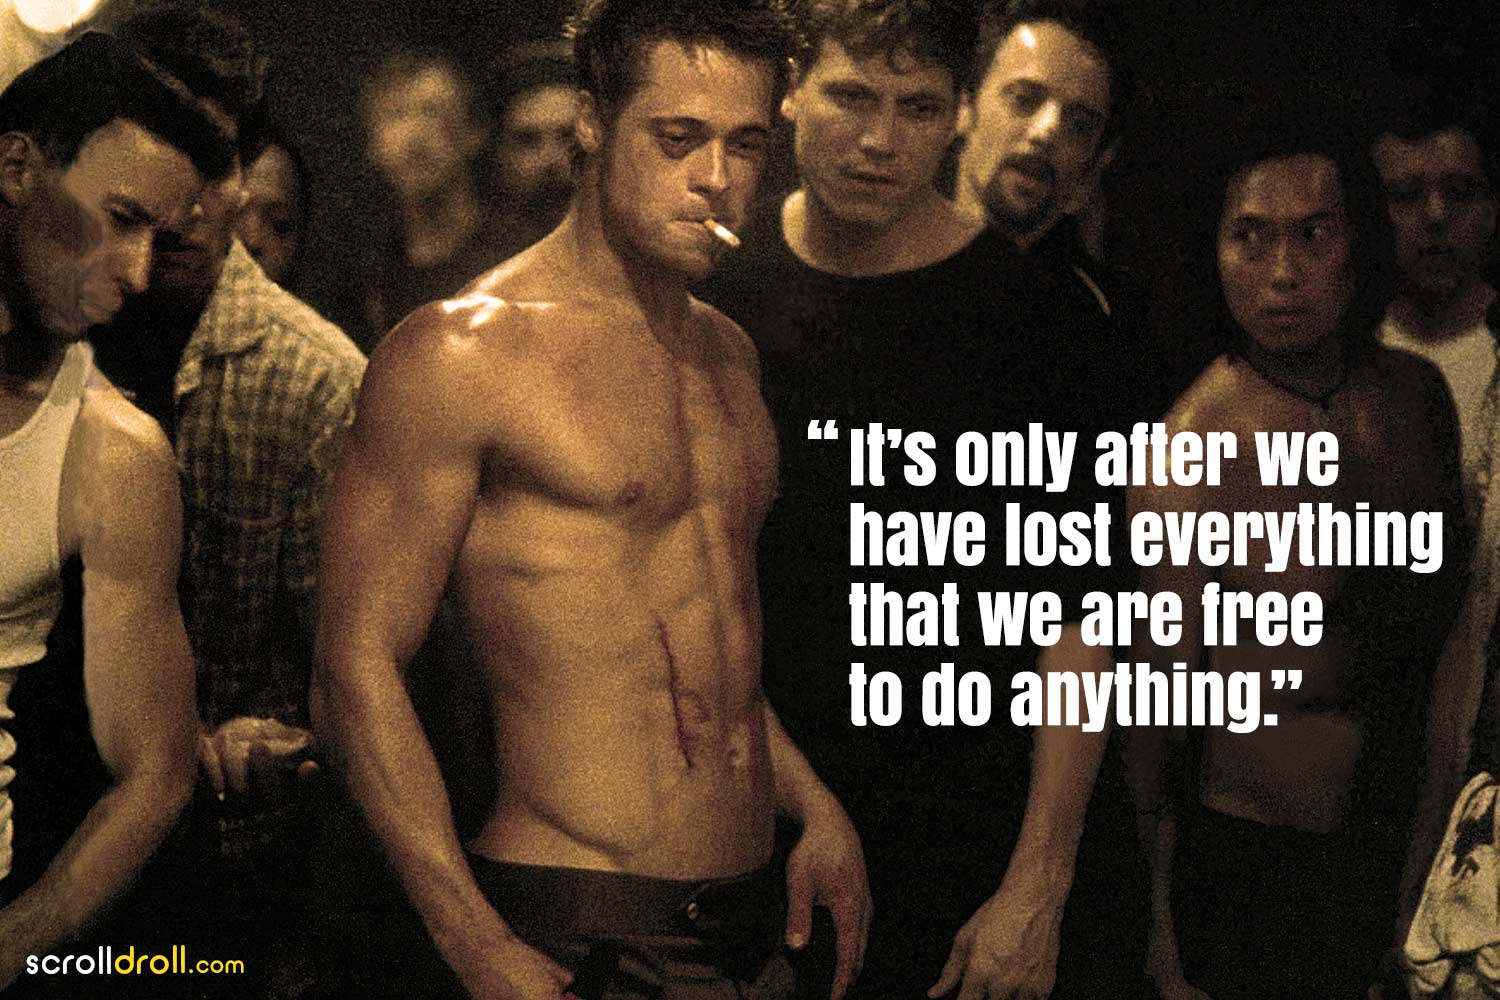 Fight Club's new ending in China: Changes were made - Polygon